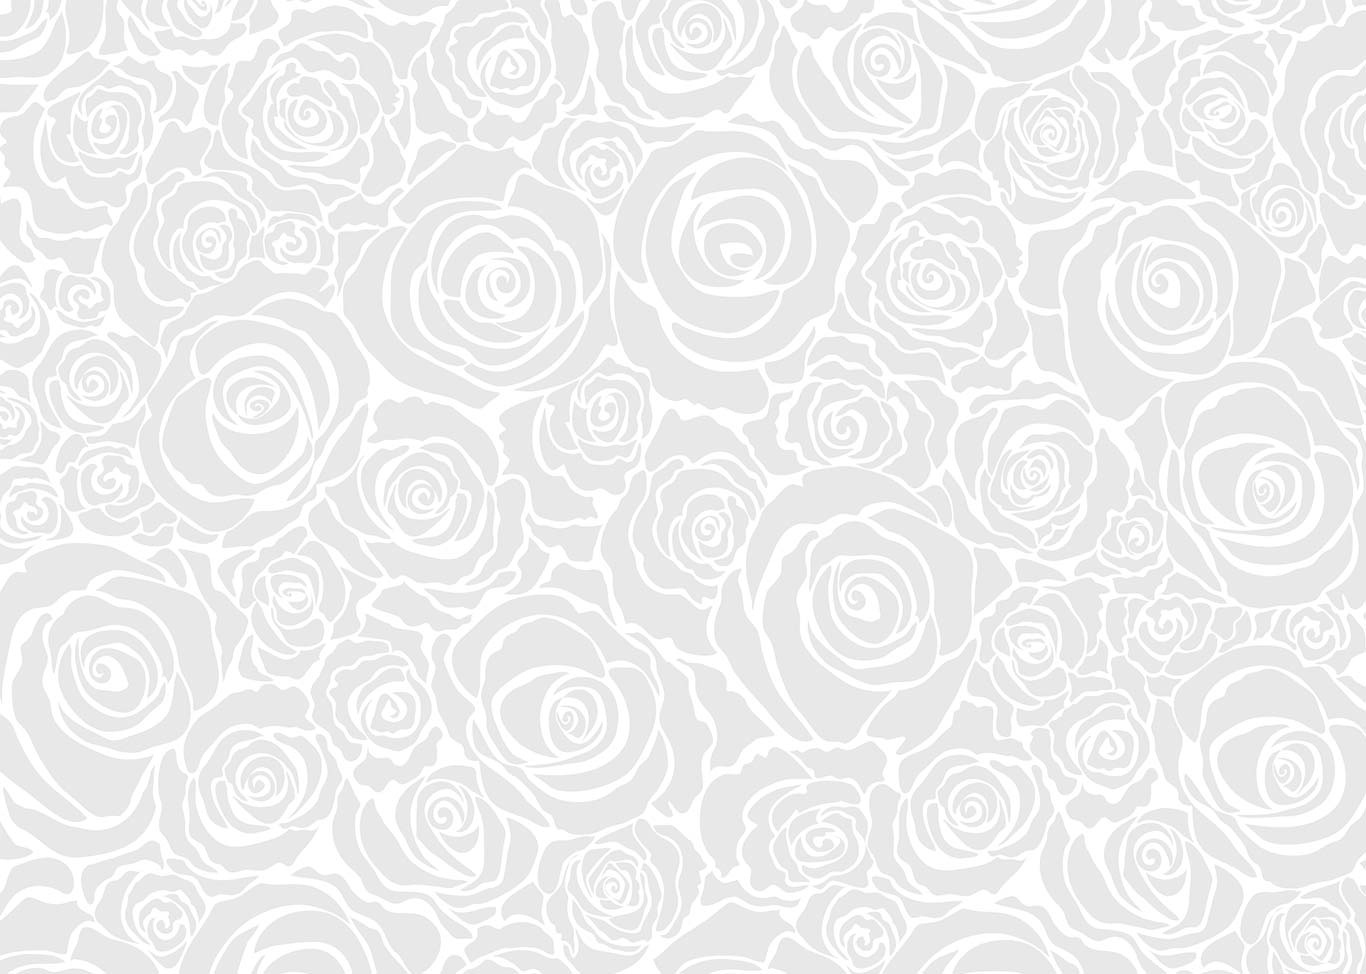 BG Roses Default background pattern for collection page banners